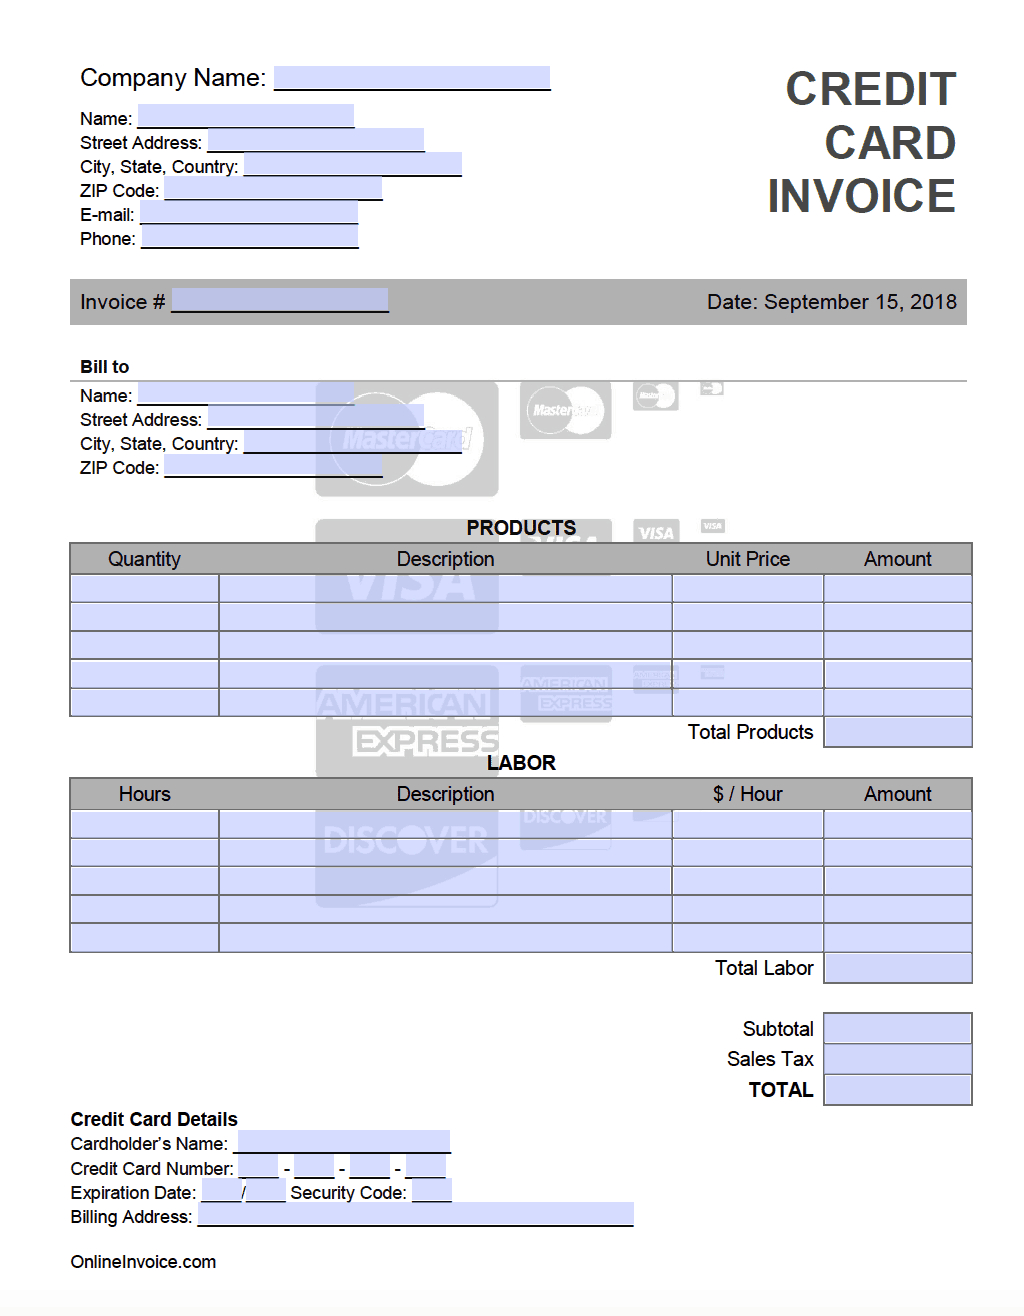 Credit Card Invoice Template - Onlineinvoice Inside Credit Card Receipt Template